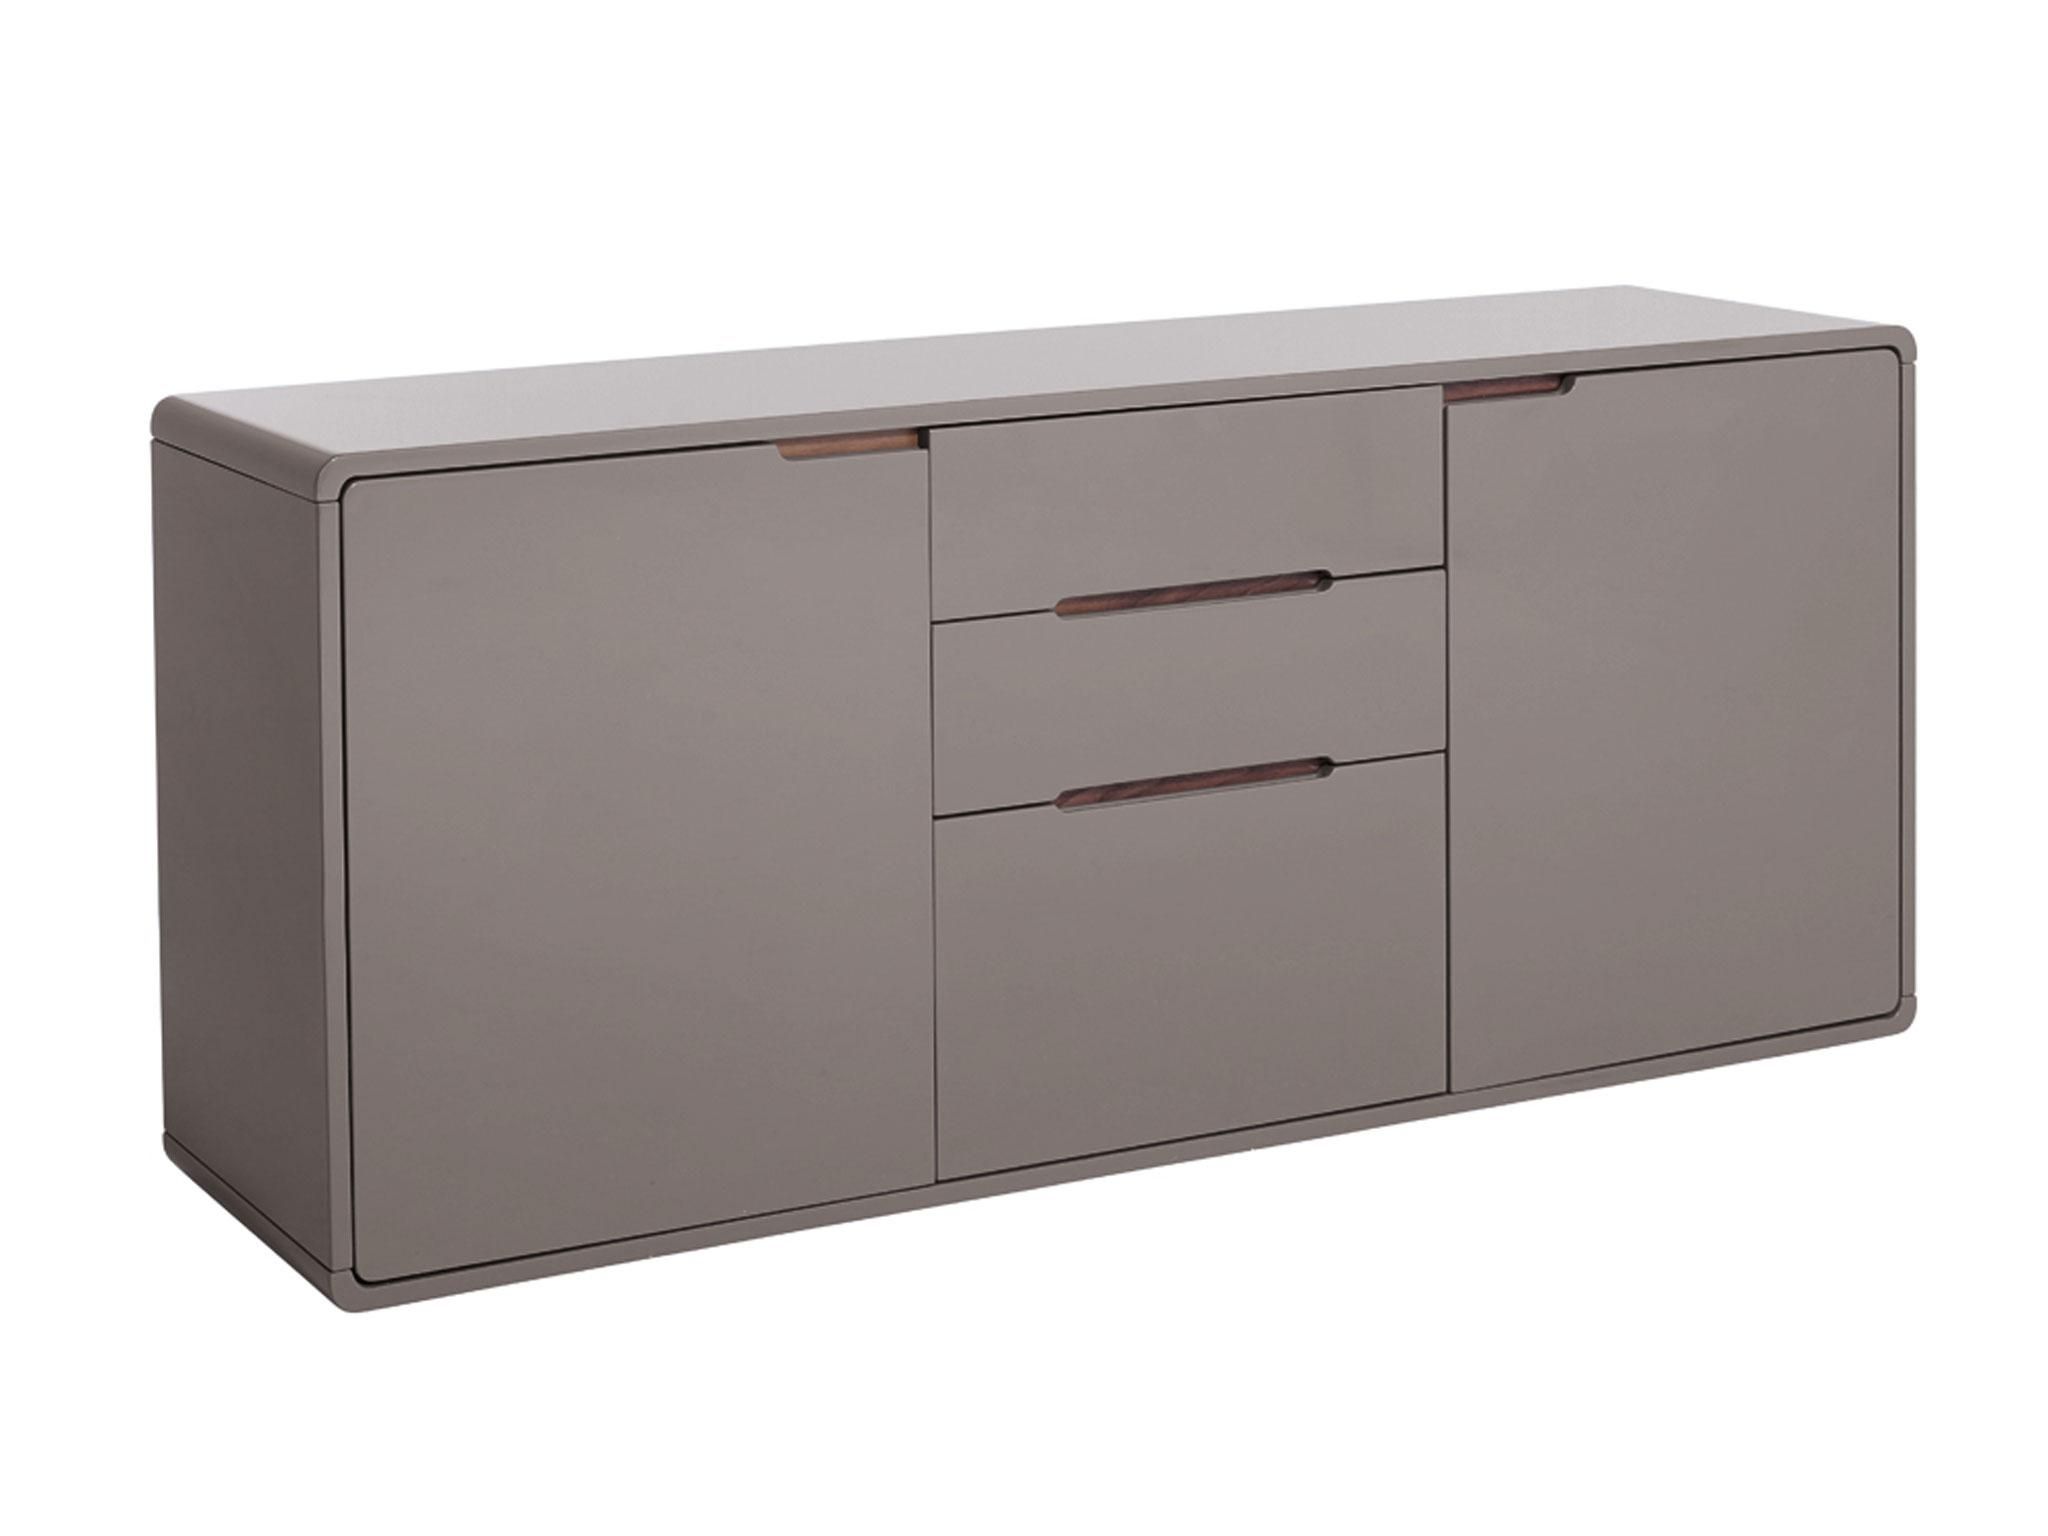 10 Best Sideboards | The Independent In Most Up To Date Mango Wood Grey 4 Drawer 4 Door Sideboards (View 13 of 20)